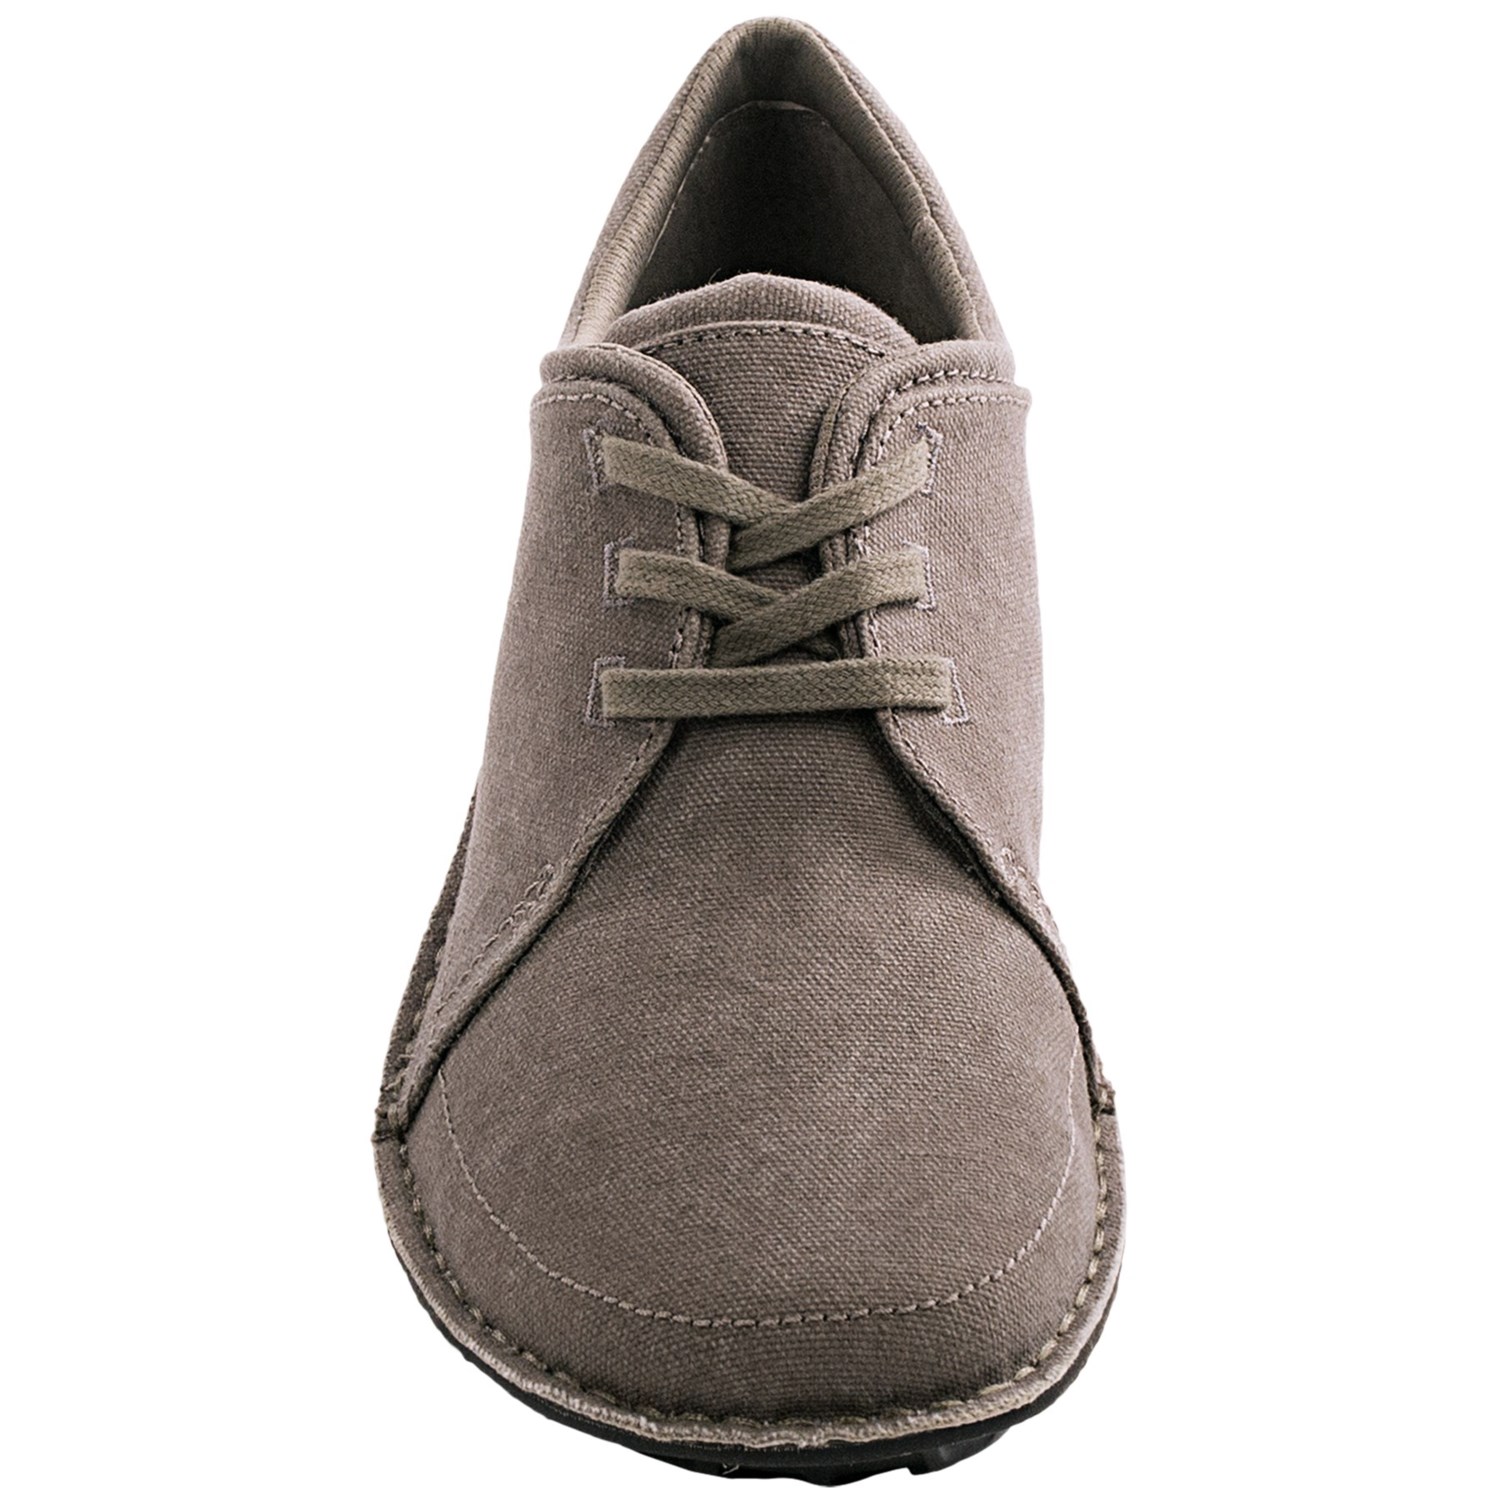 Patagonia Loulu Canvas Shoes (For Men) 8080H